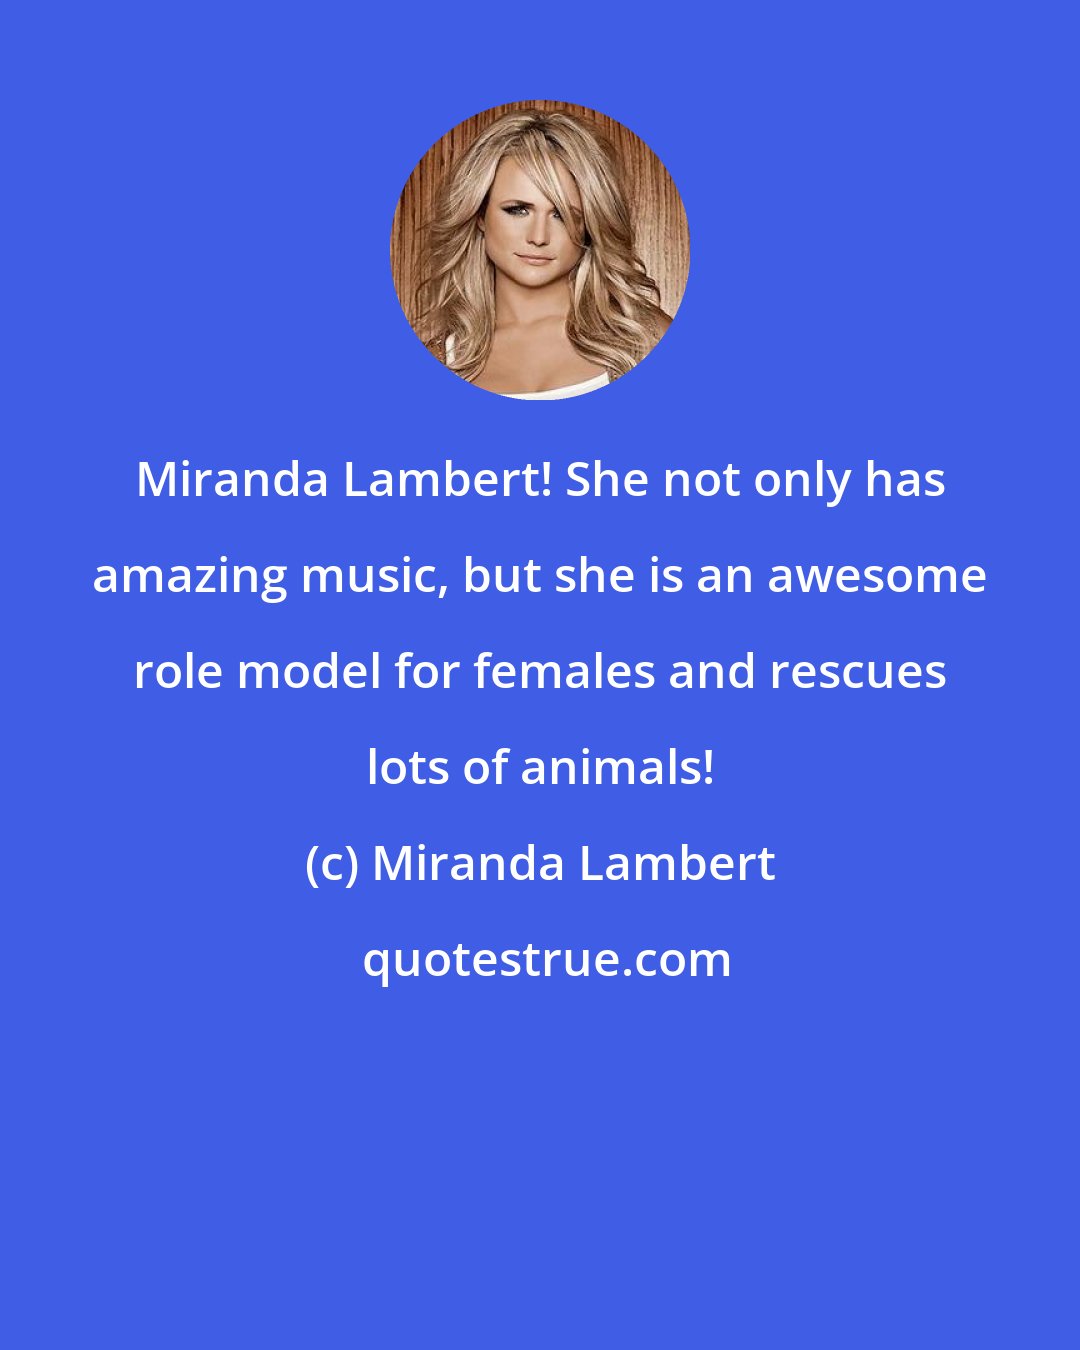 Miranda Lambert: Miranda Lambert! She not only has amazing music, but she is an awesome role model for females and rescues lots of animals!